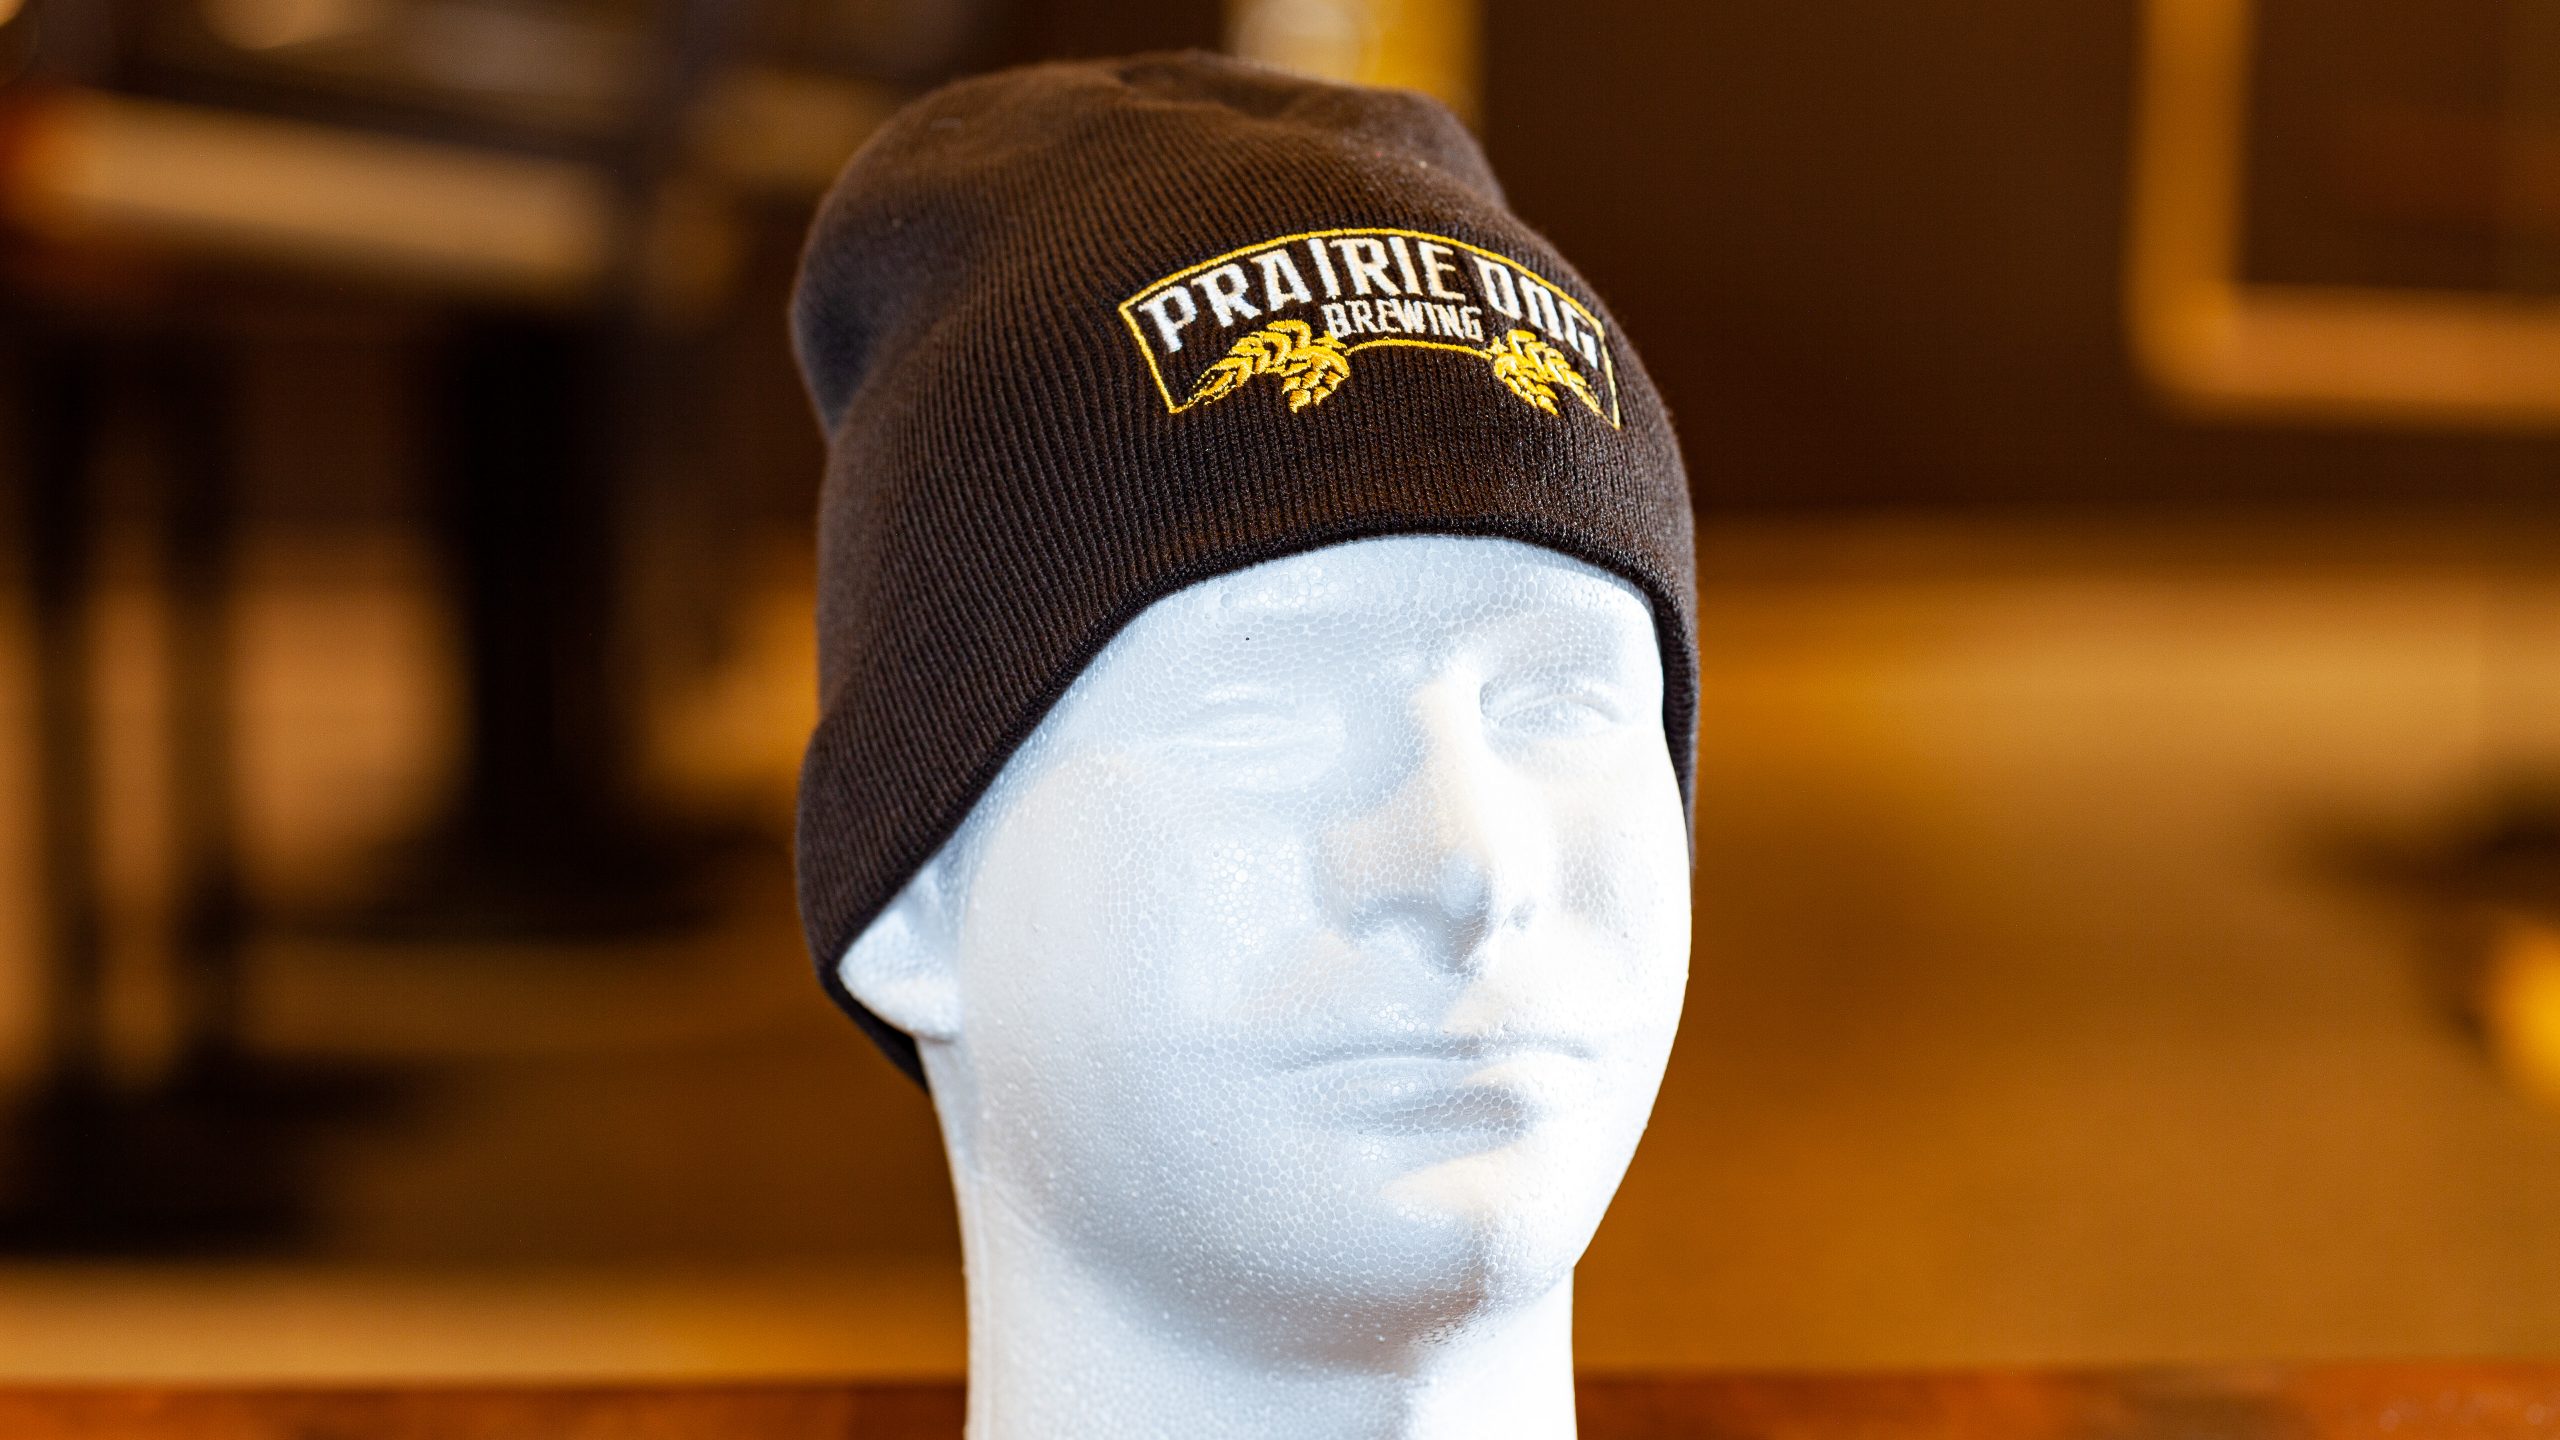 Prairie Dog Brewing's basic brown beanie-style toque with embroidered logo.